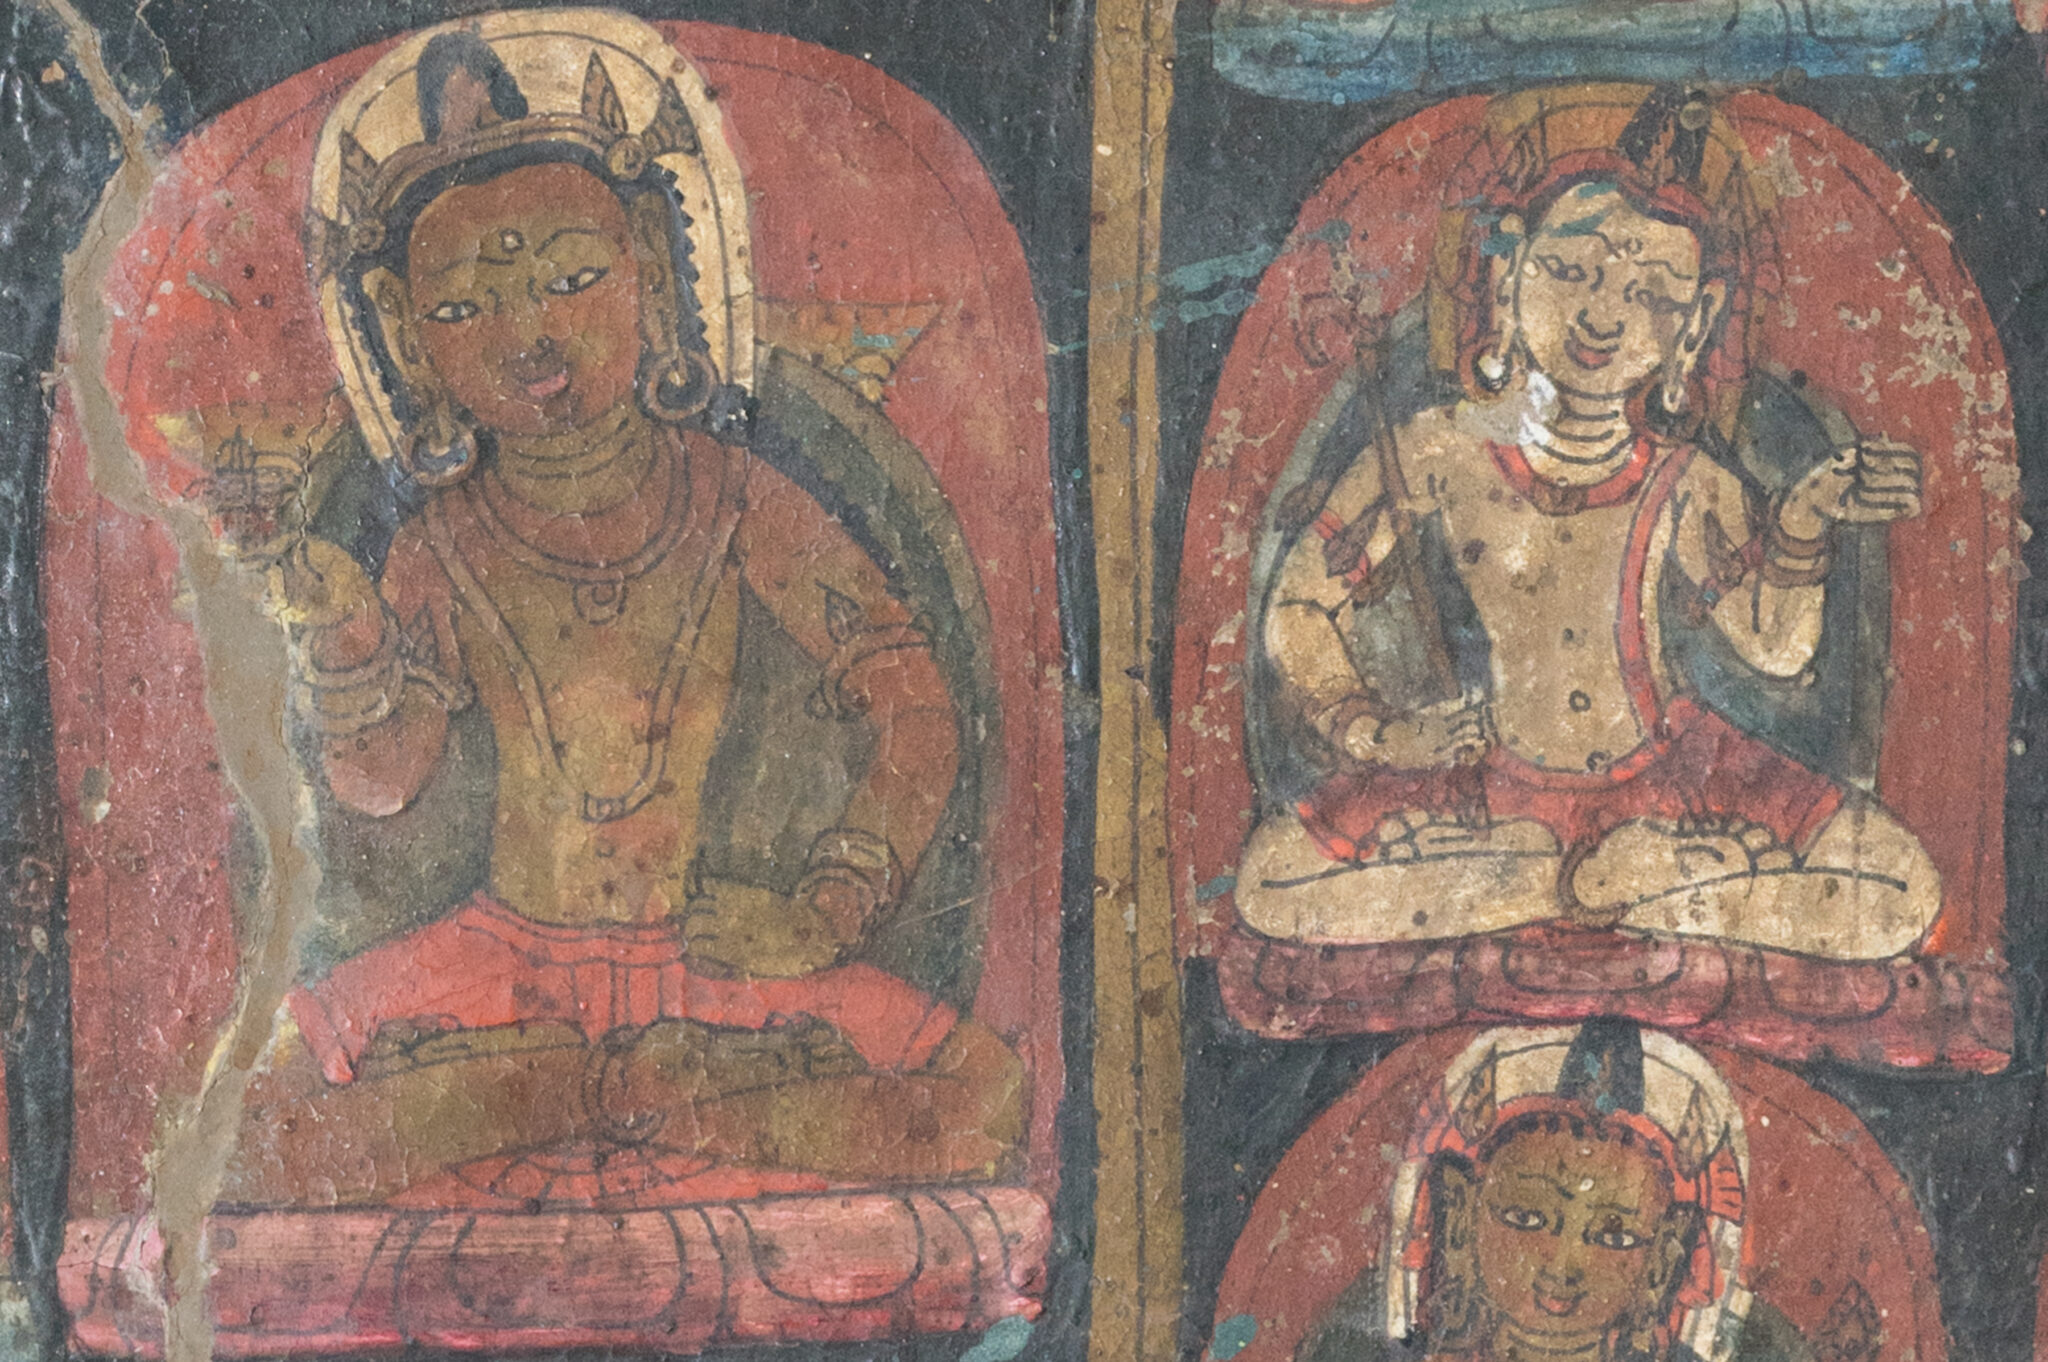 Mural detail showing two crowned deities wearing long necklaces seated before red nimbuses